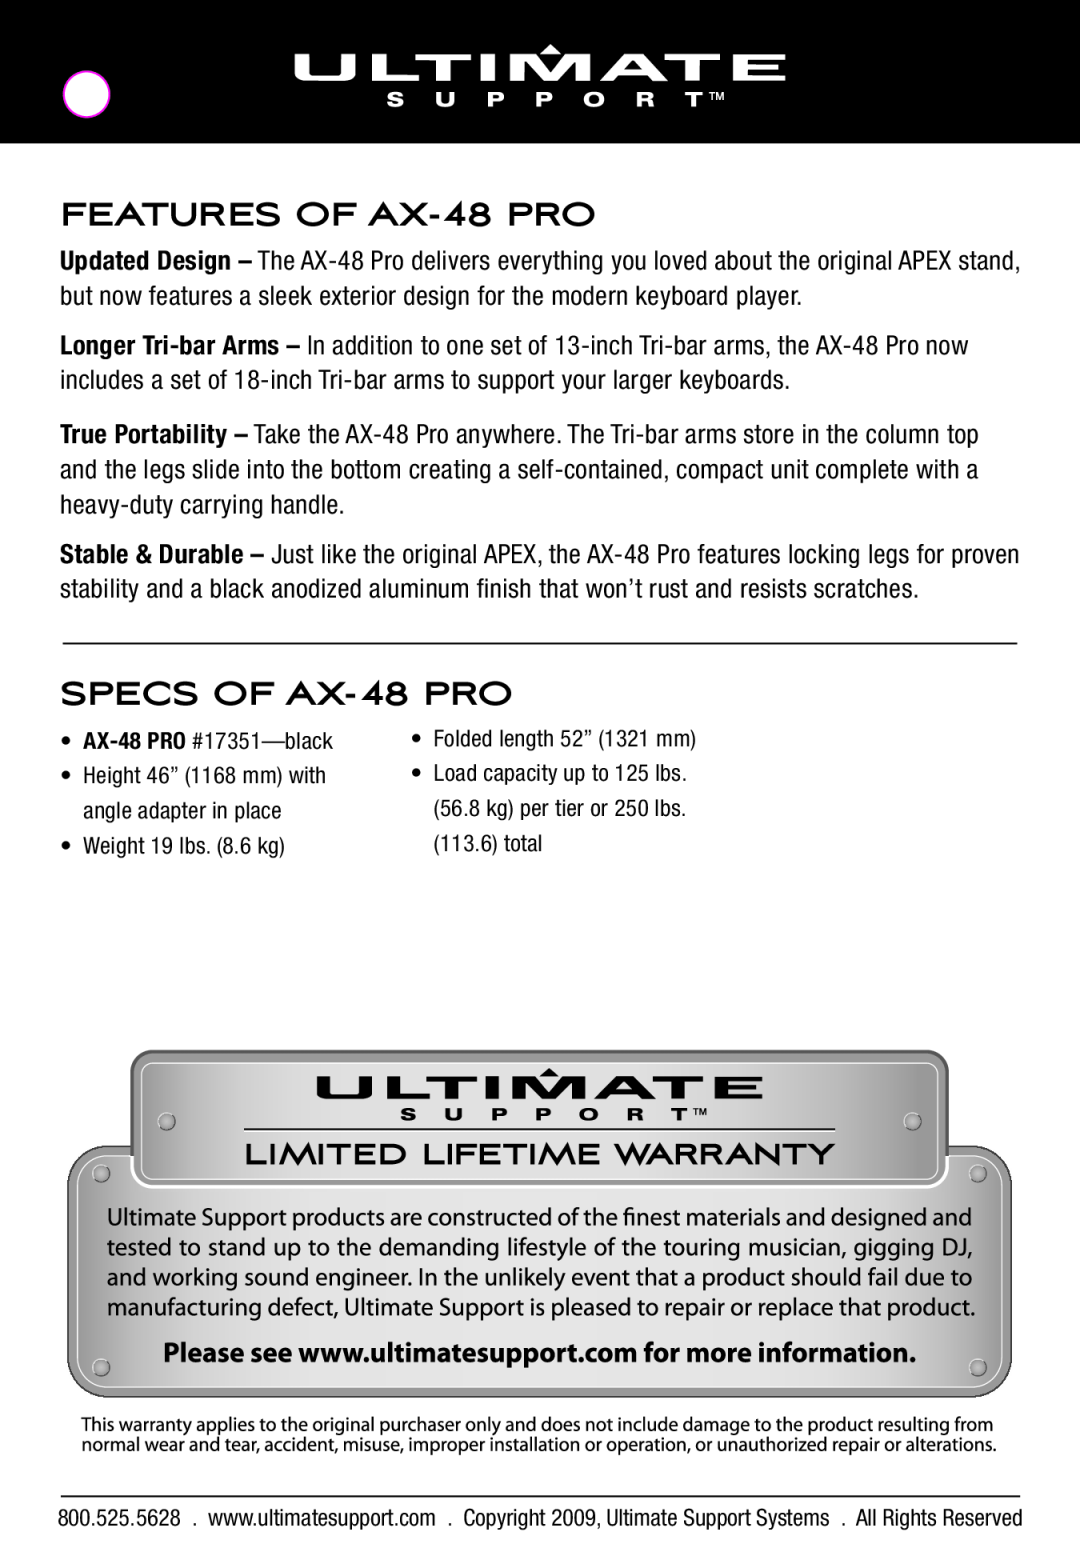 Ultimate Support Systems manual FEATURES OF AX-48 PRO, SPECS OF AX-48 PRO 